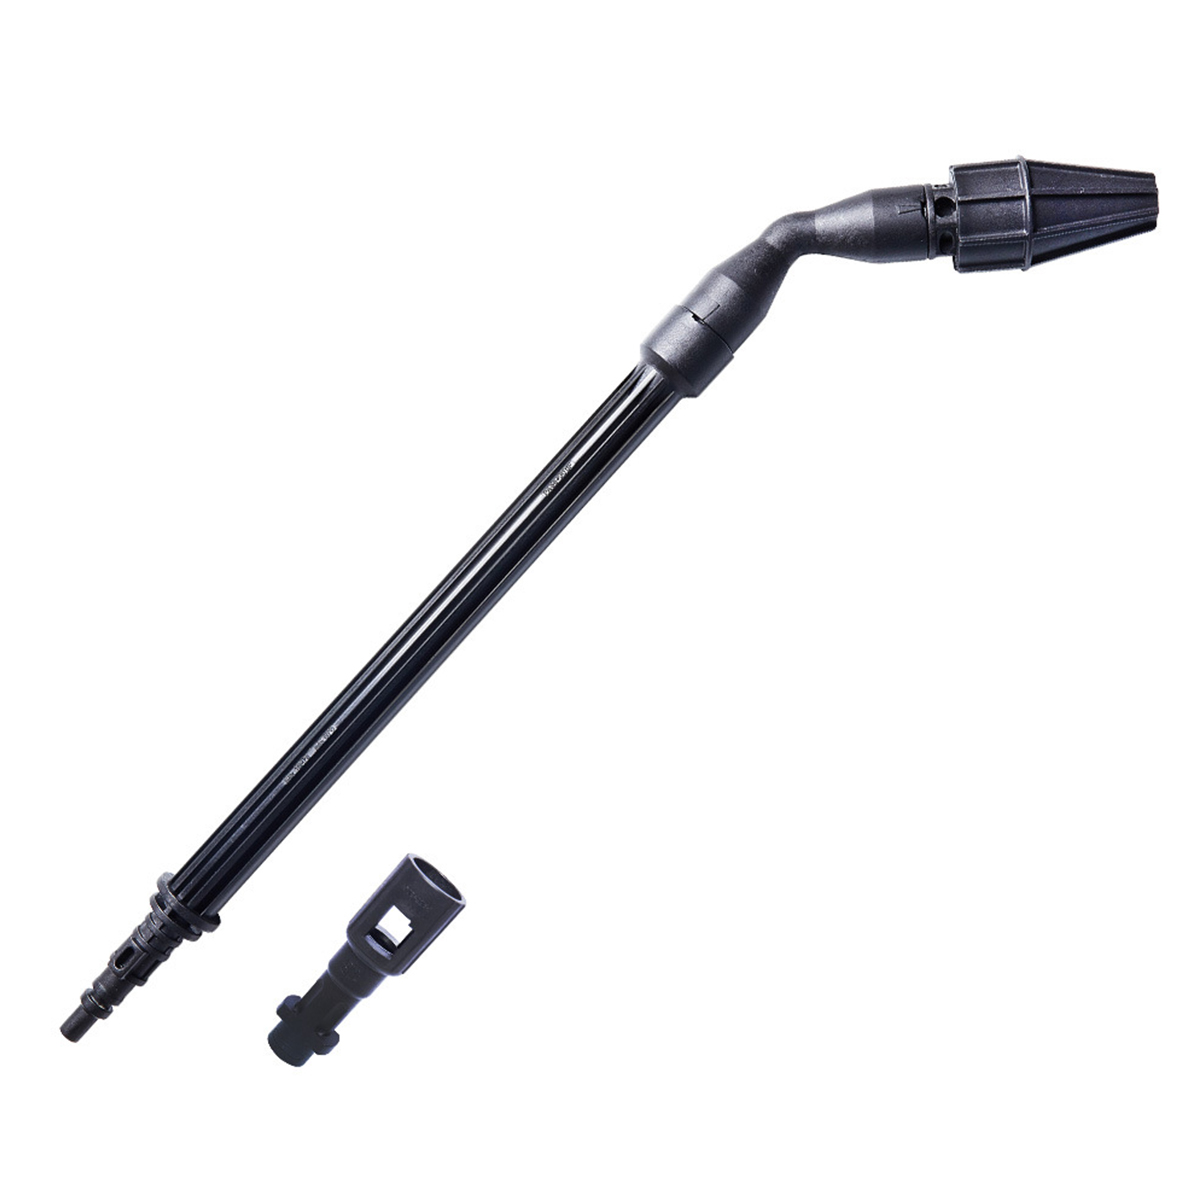 160-Bar-High-Pressure-Washer-Nozzle-432cm-StraightBent-Mouth-Adapter-1662973-5